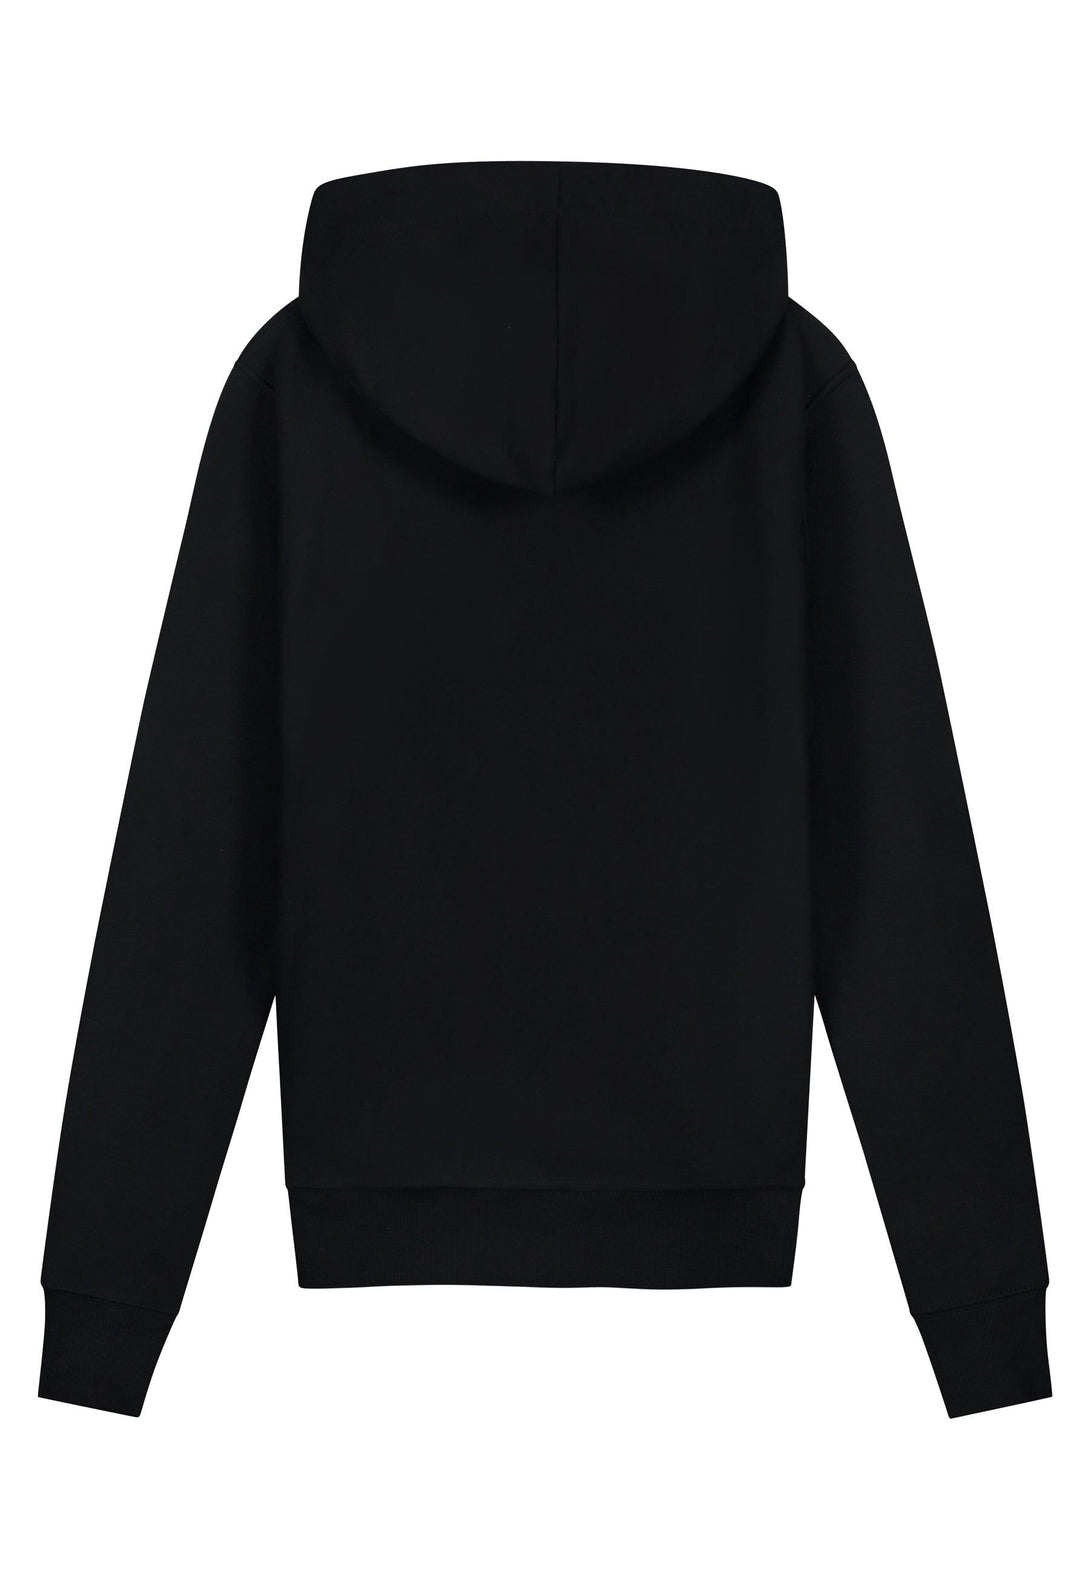 Black hoodie Amsterdam Artwork – Collect Label The